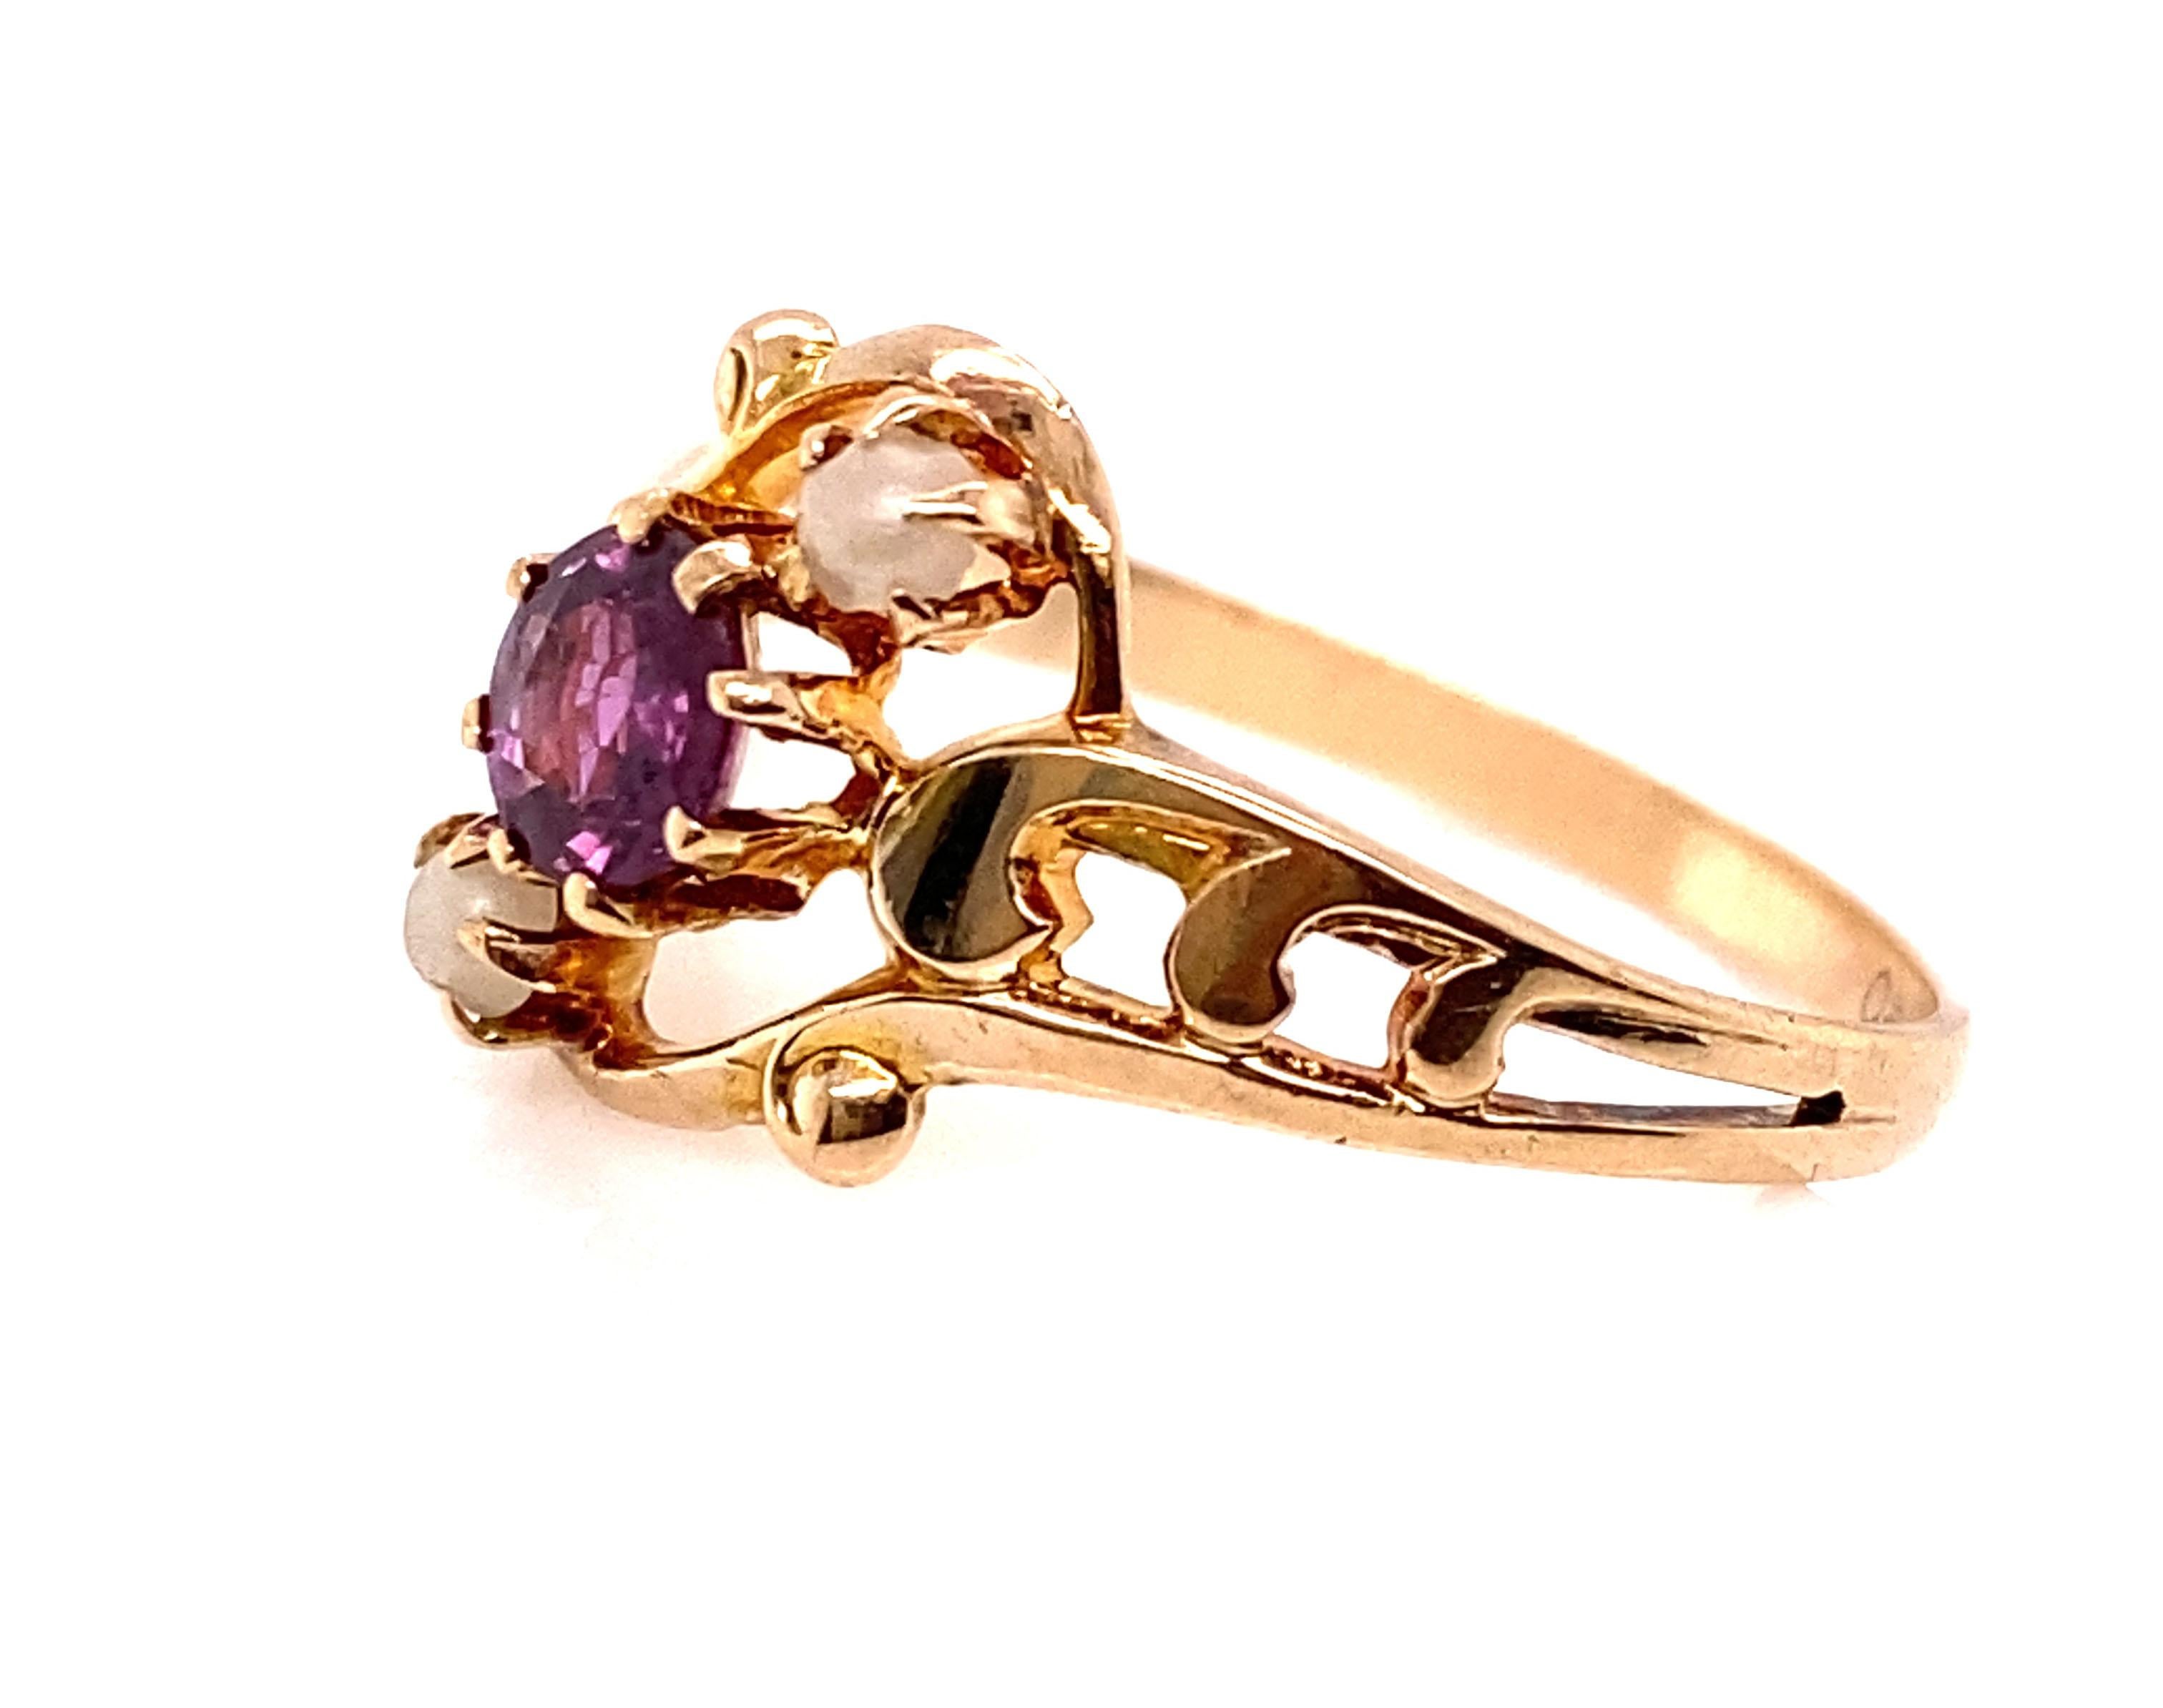 Round Cut Victorian Amethyst Ring with Pearls .40ct Original 1860's -1890's Antique 14K